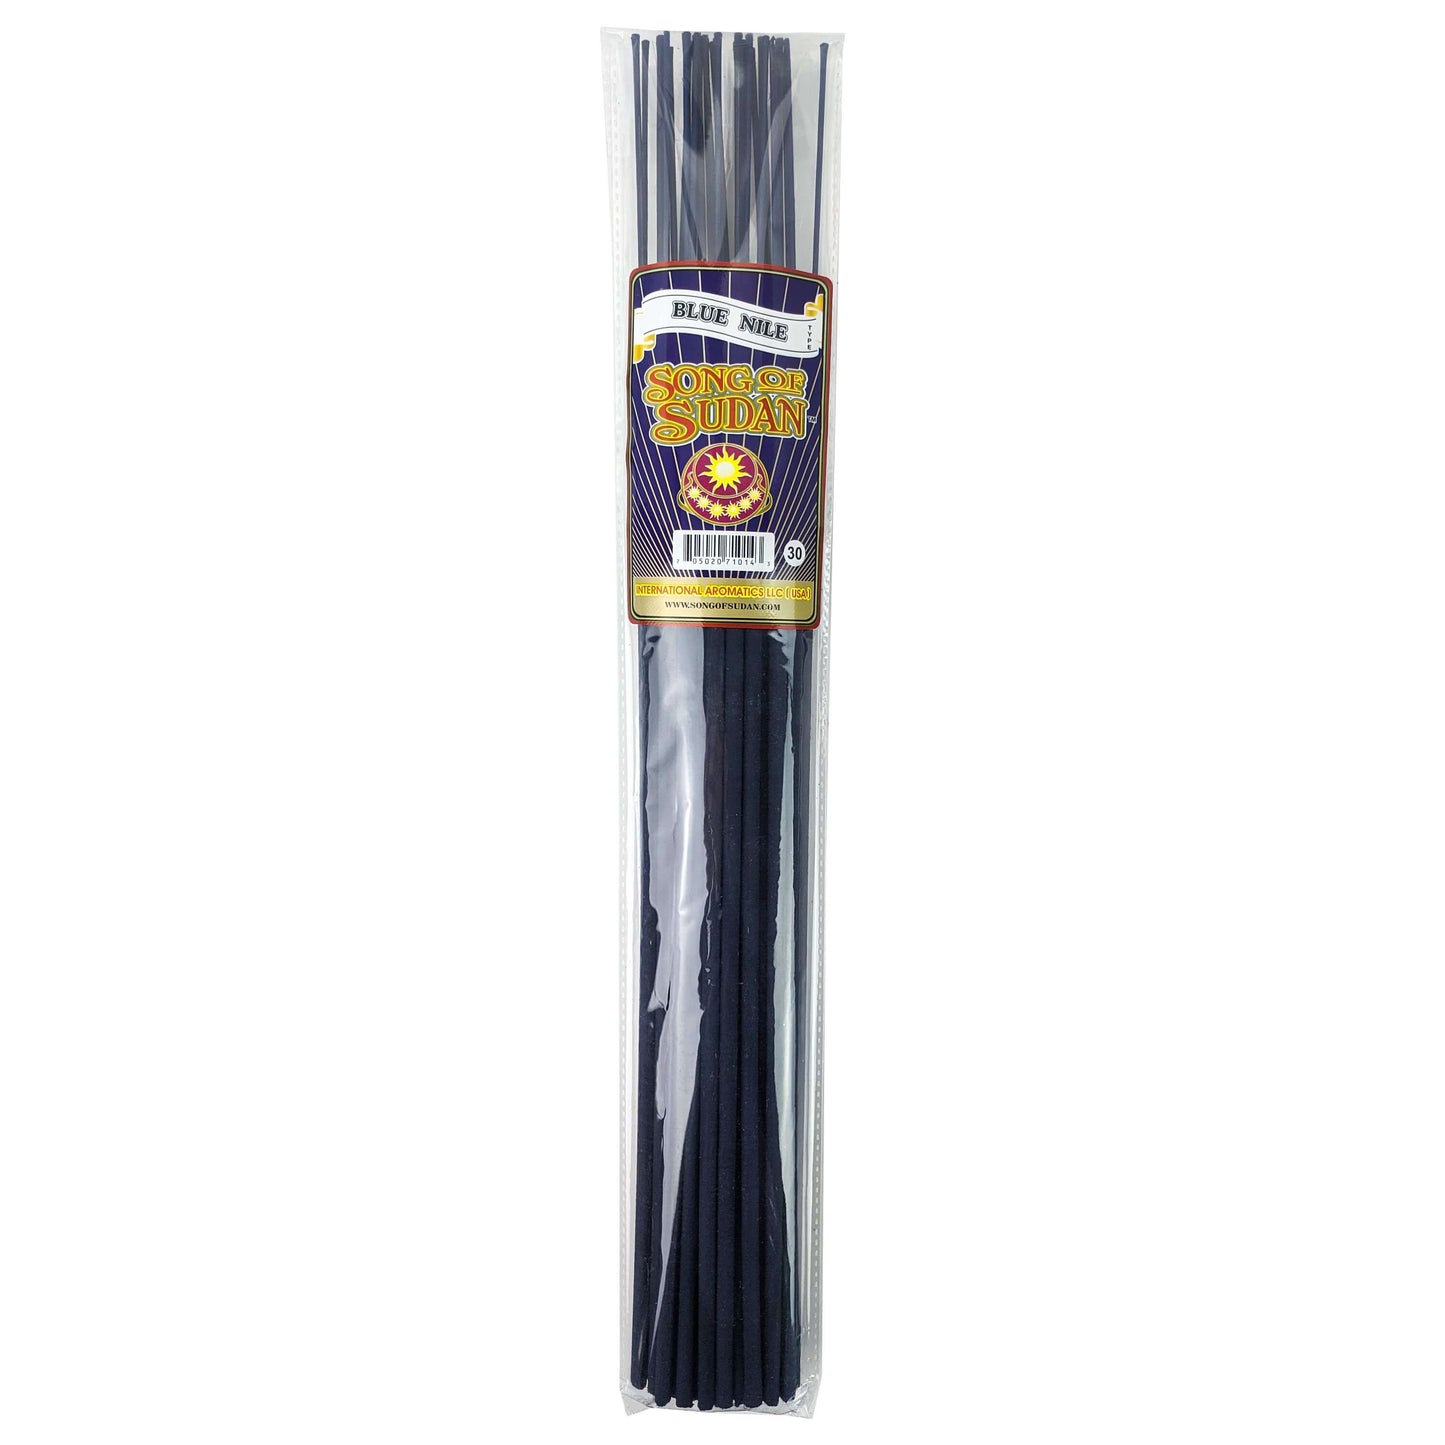 Blue Nile Type Scent, Song Of Sudan 19" Jumbo Incense